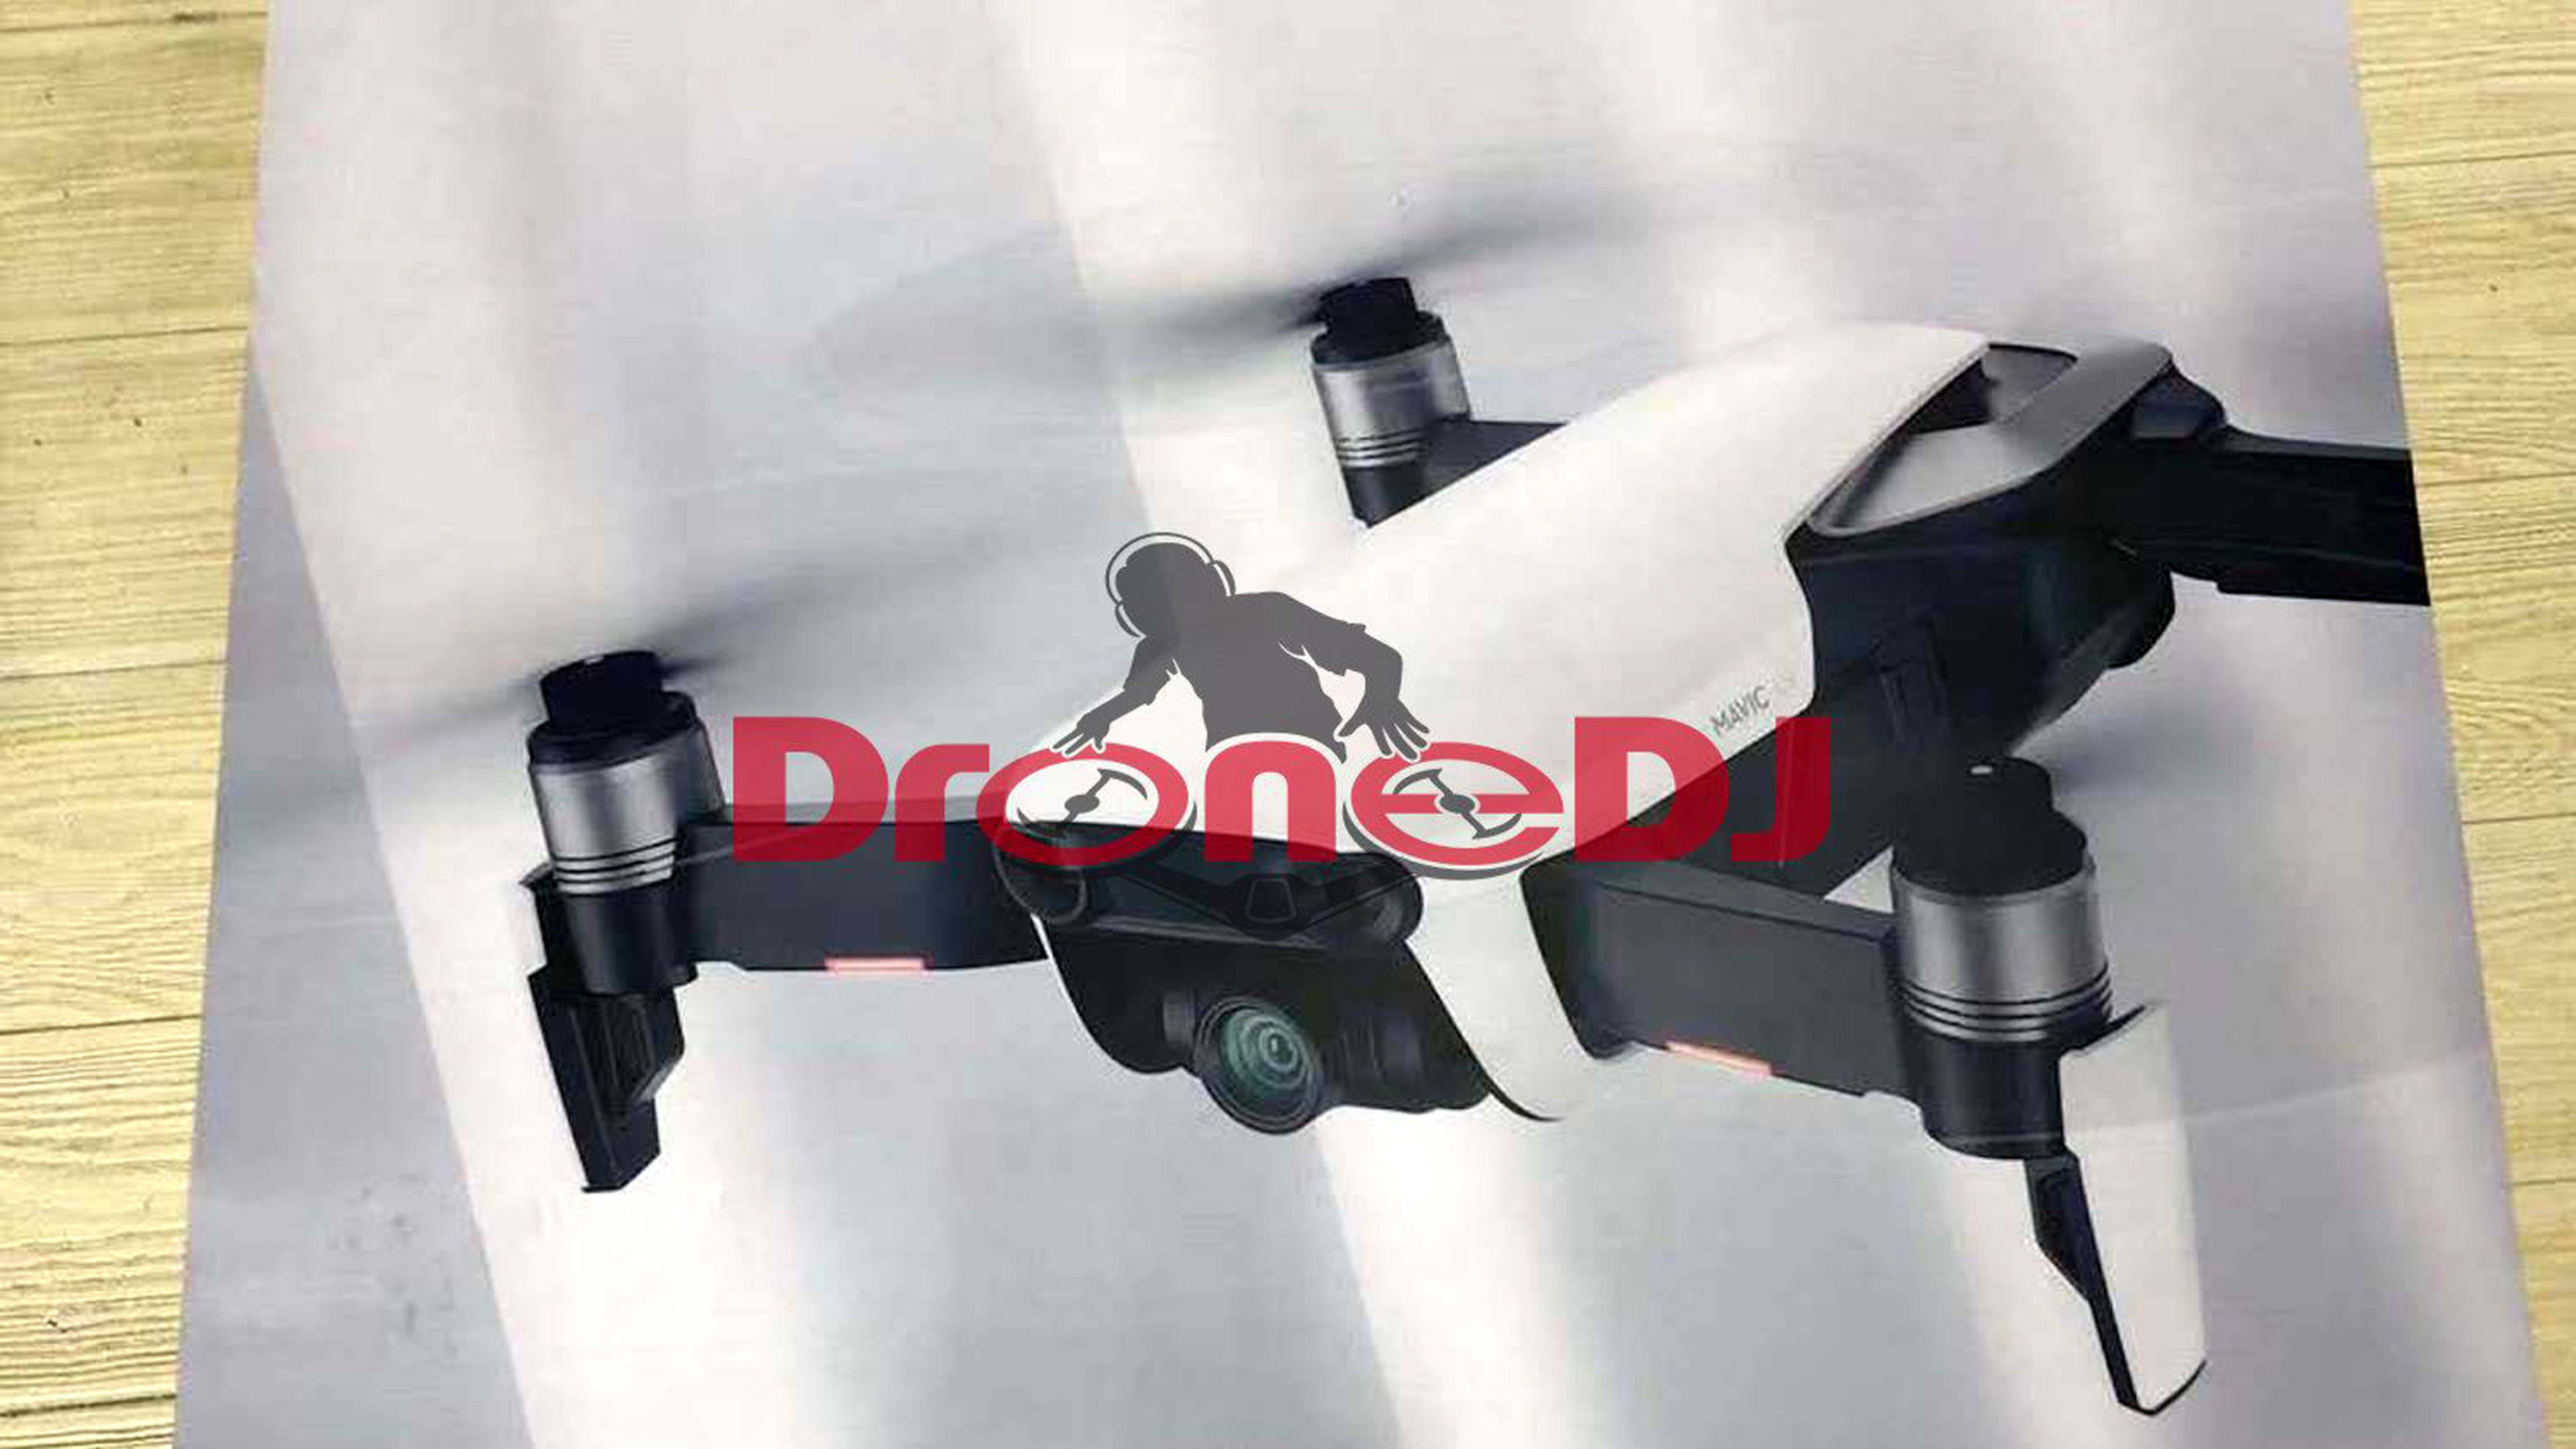 Details of DJI’s new drone, the Mavic Air, leak before its reveal